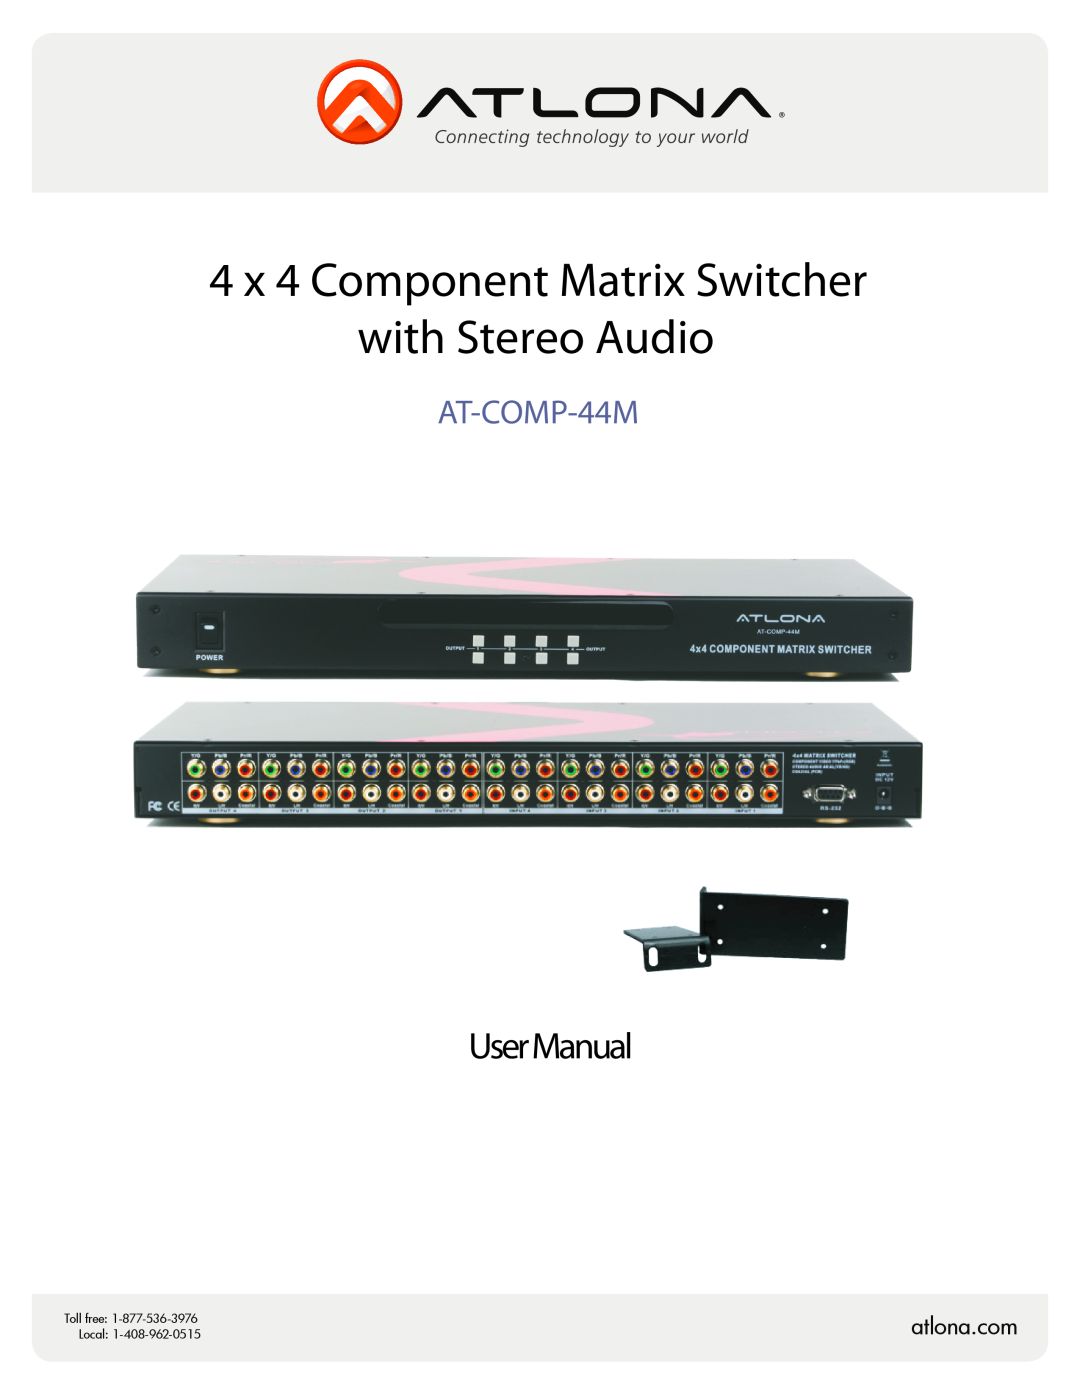 Atlona AT-COMP-44M user manual UserManual, 4 x 4 Component Matrix Switcher with Stereo Audio, Toll free, Local 